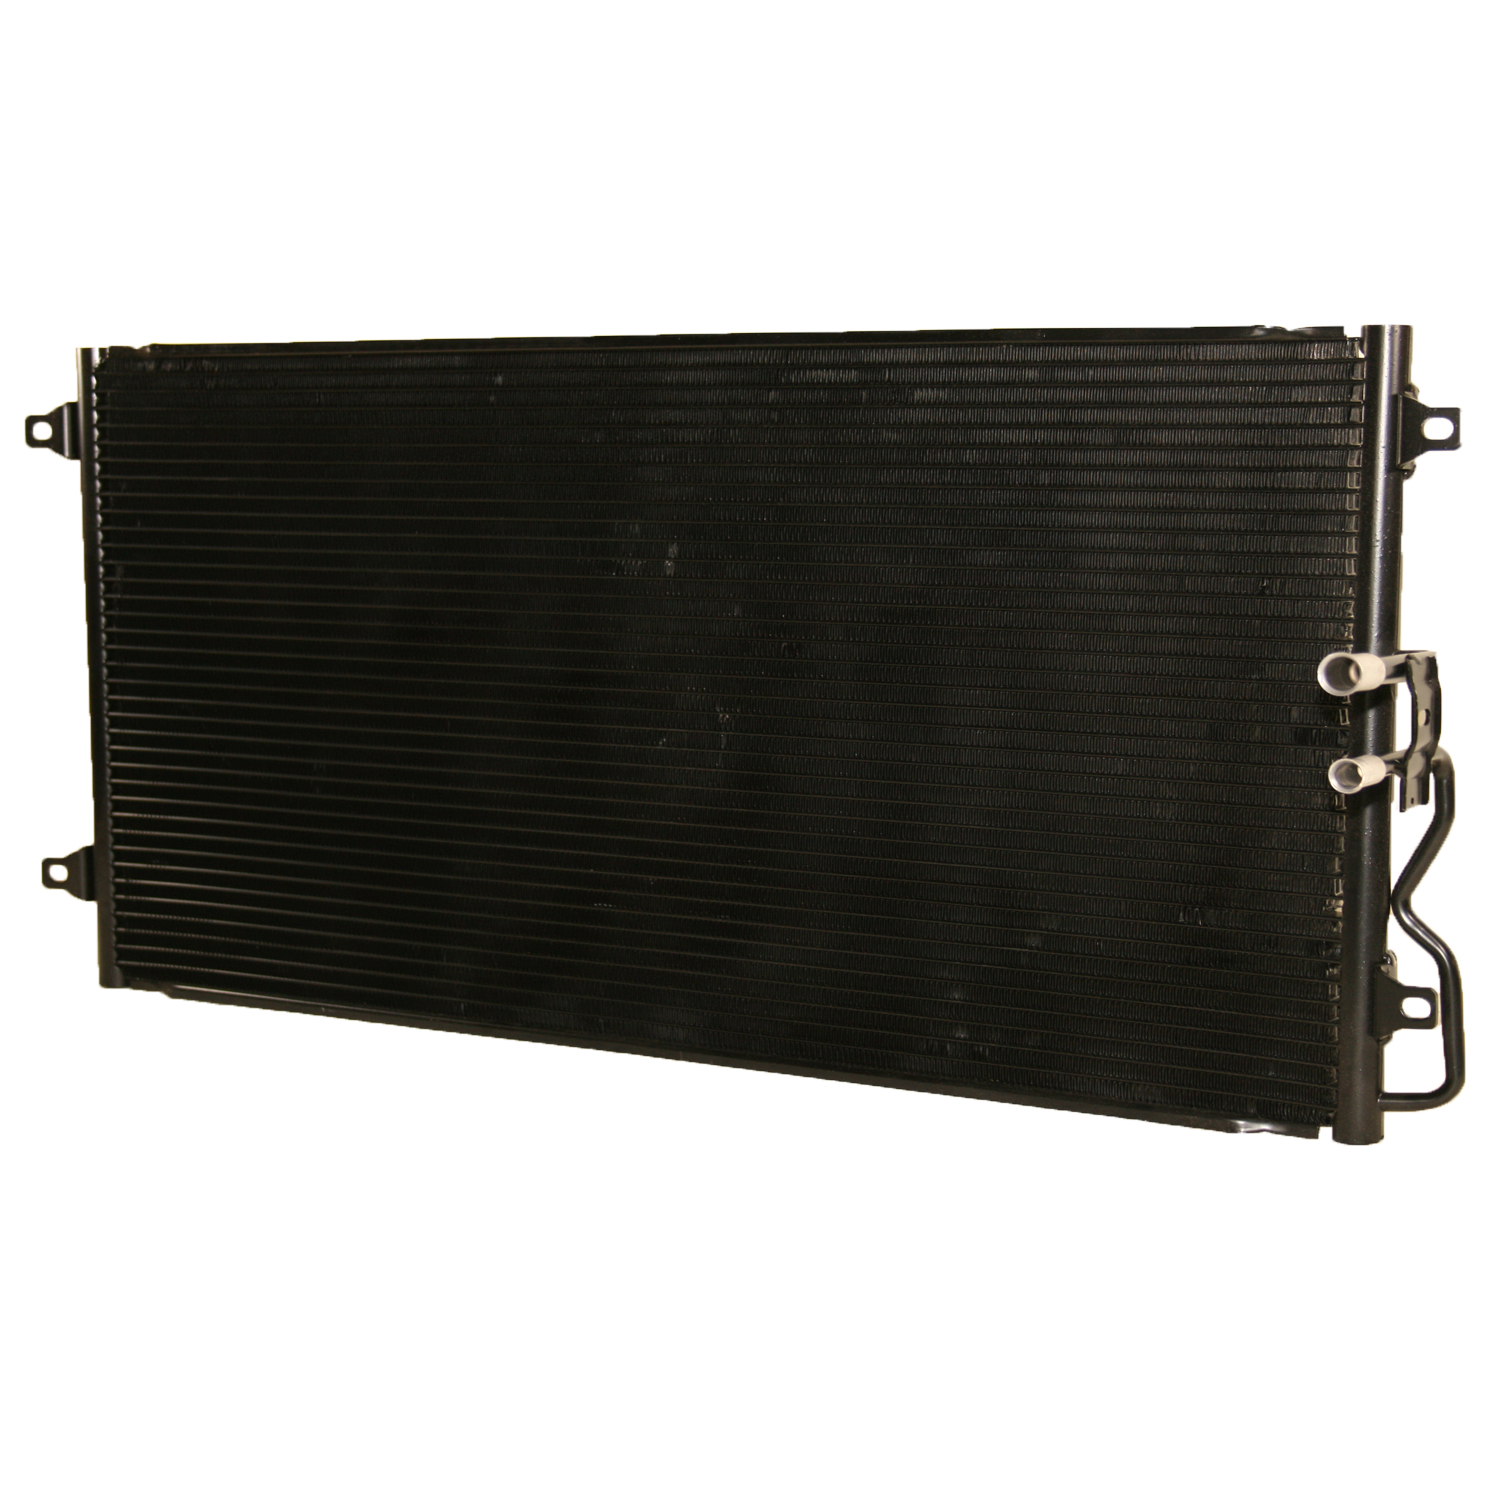 TCW Condenser 44-4616 New Product Image field_60b6a13a6e67c